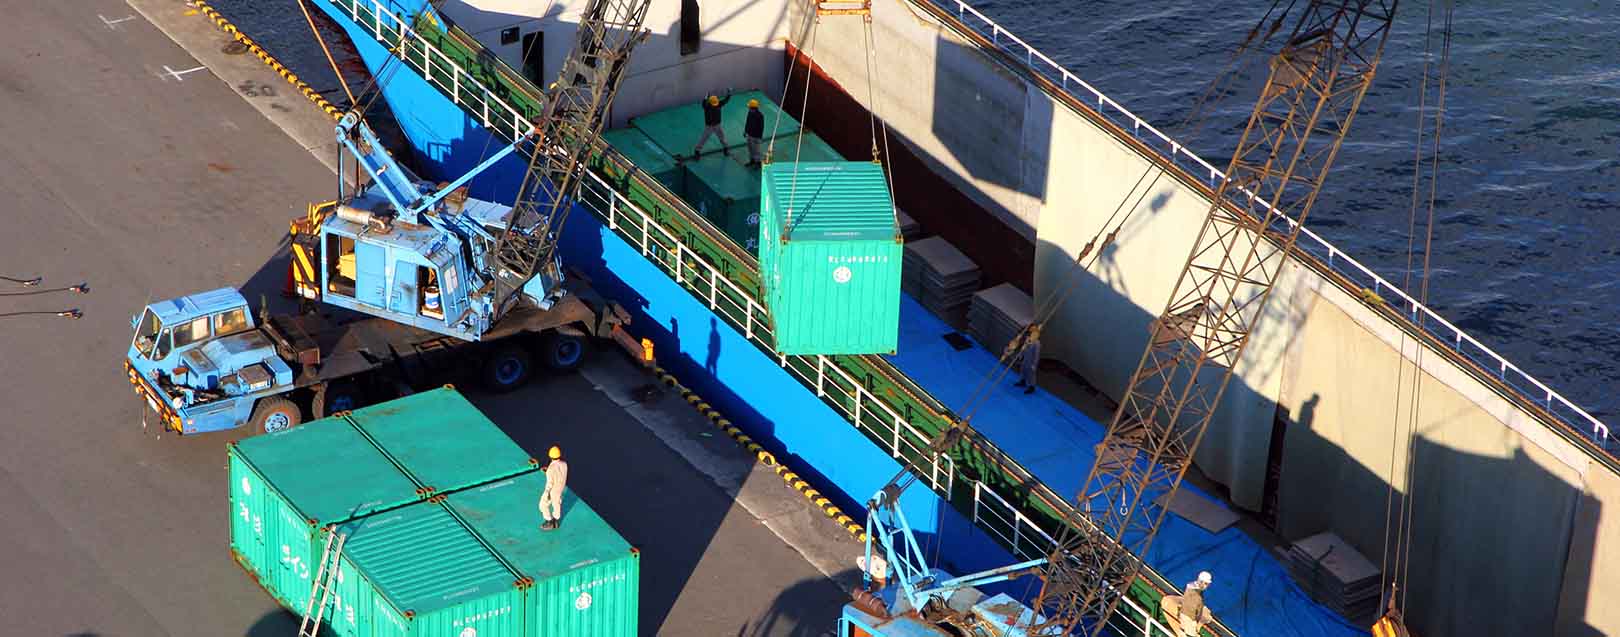 Japan's exports to decline again in March